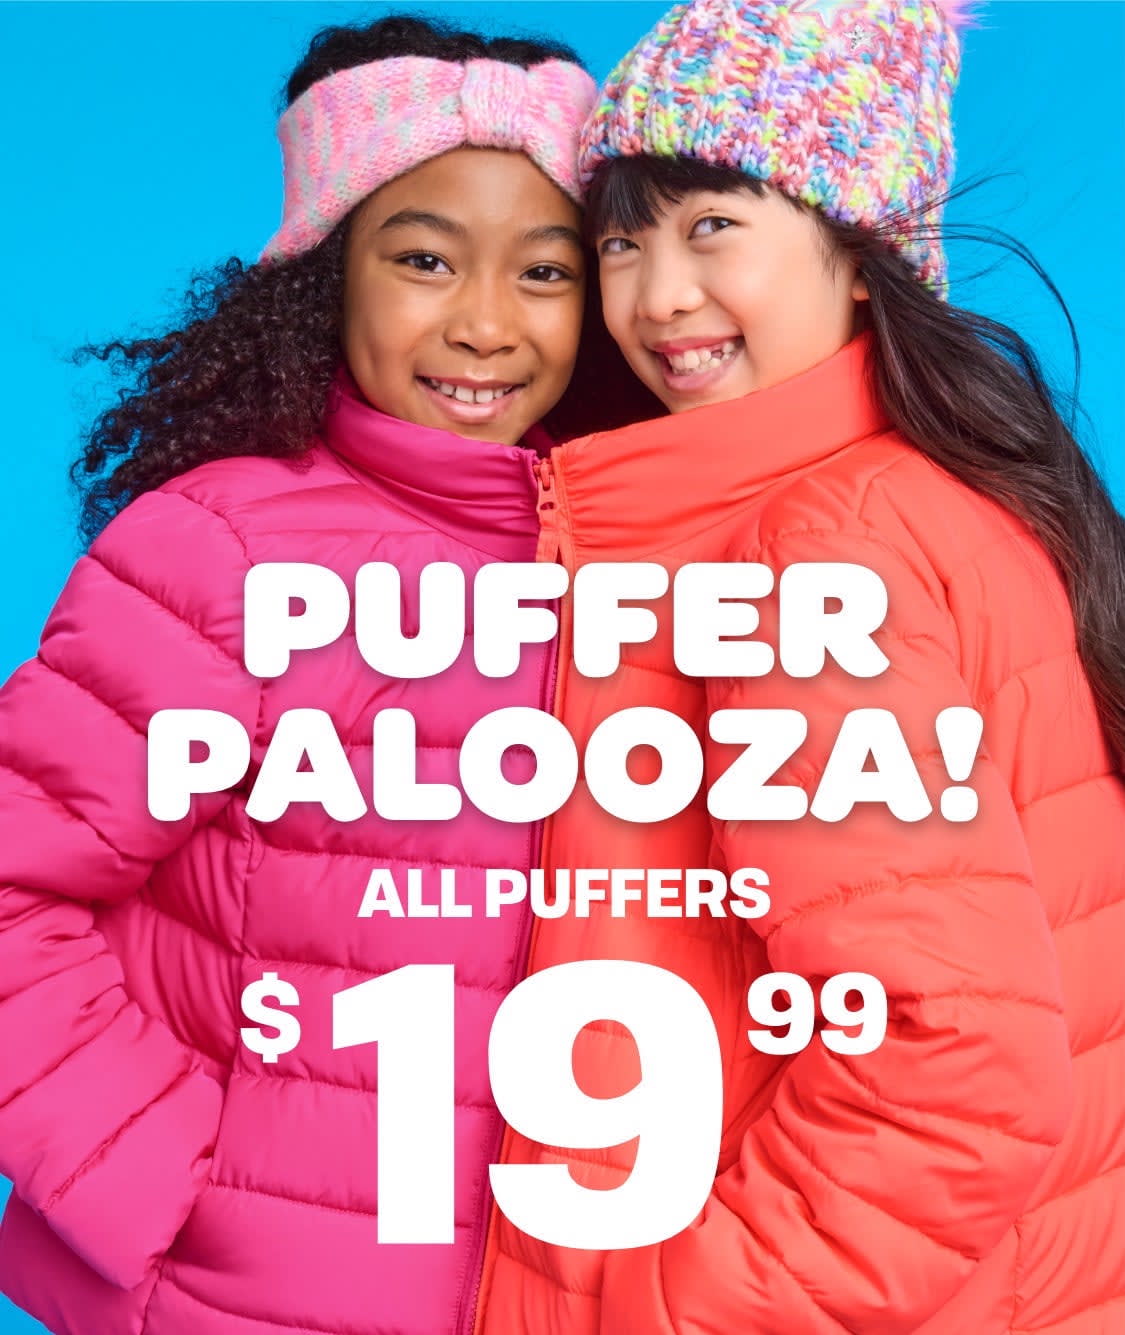 Limited Time Only! Puffer Palooza! $19.99 | EXTRA SAVINGS Up to 30% off! With code SAVEMORE